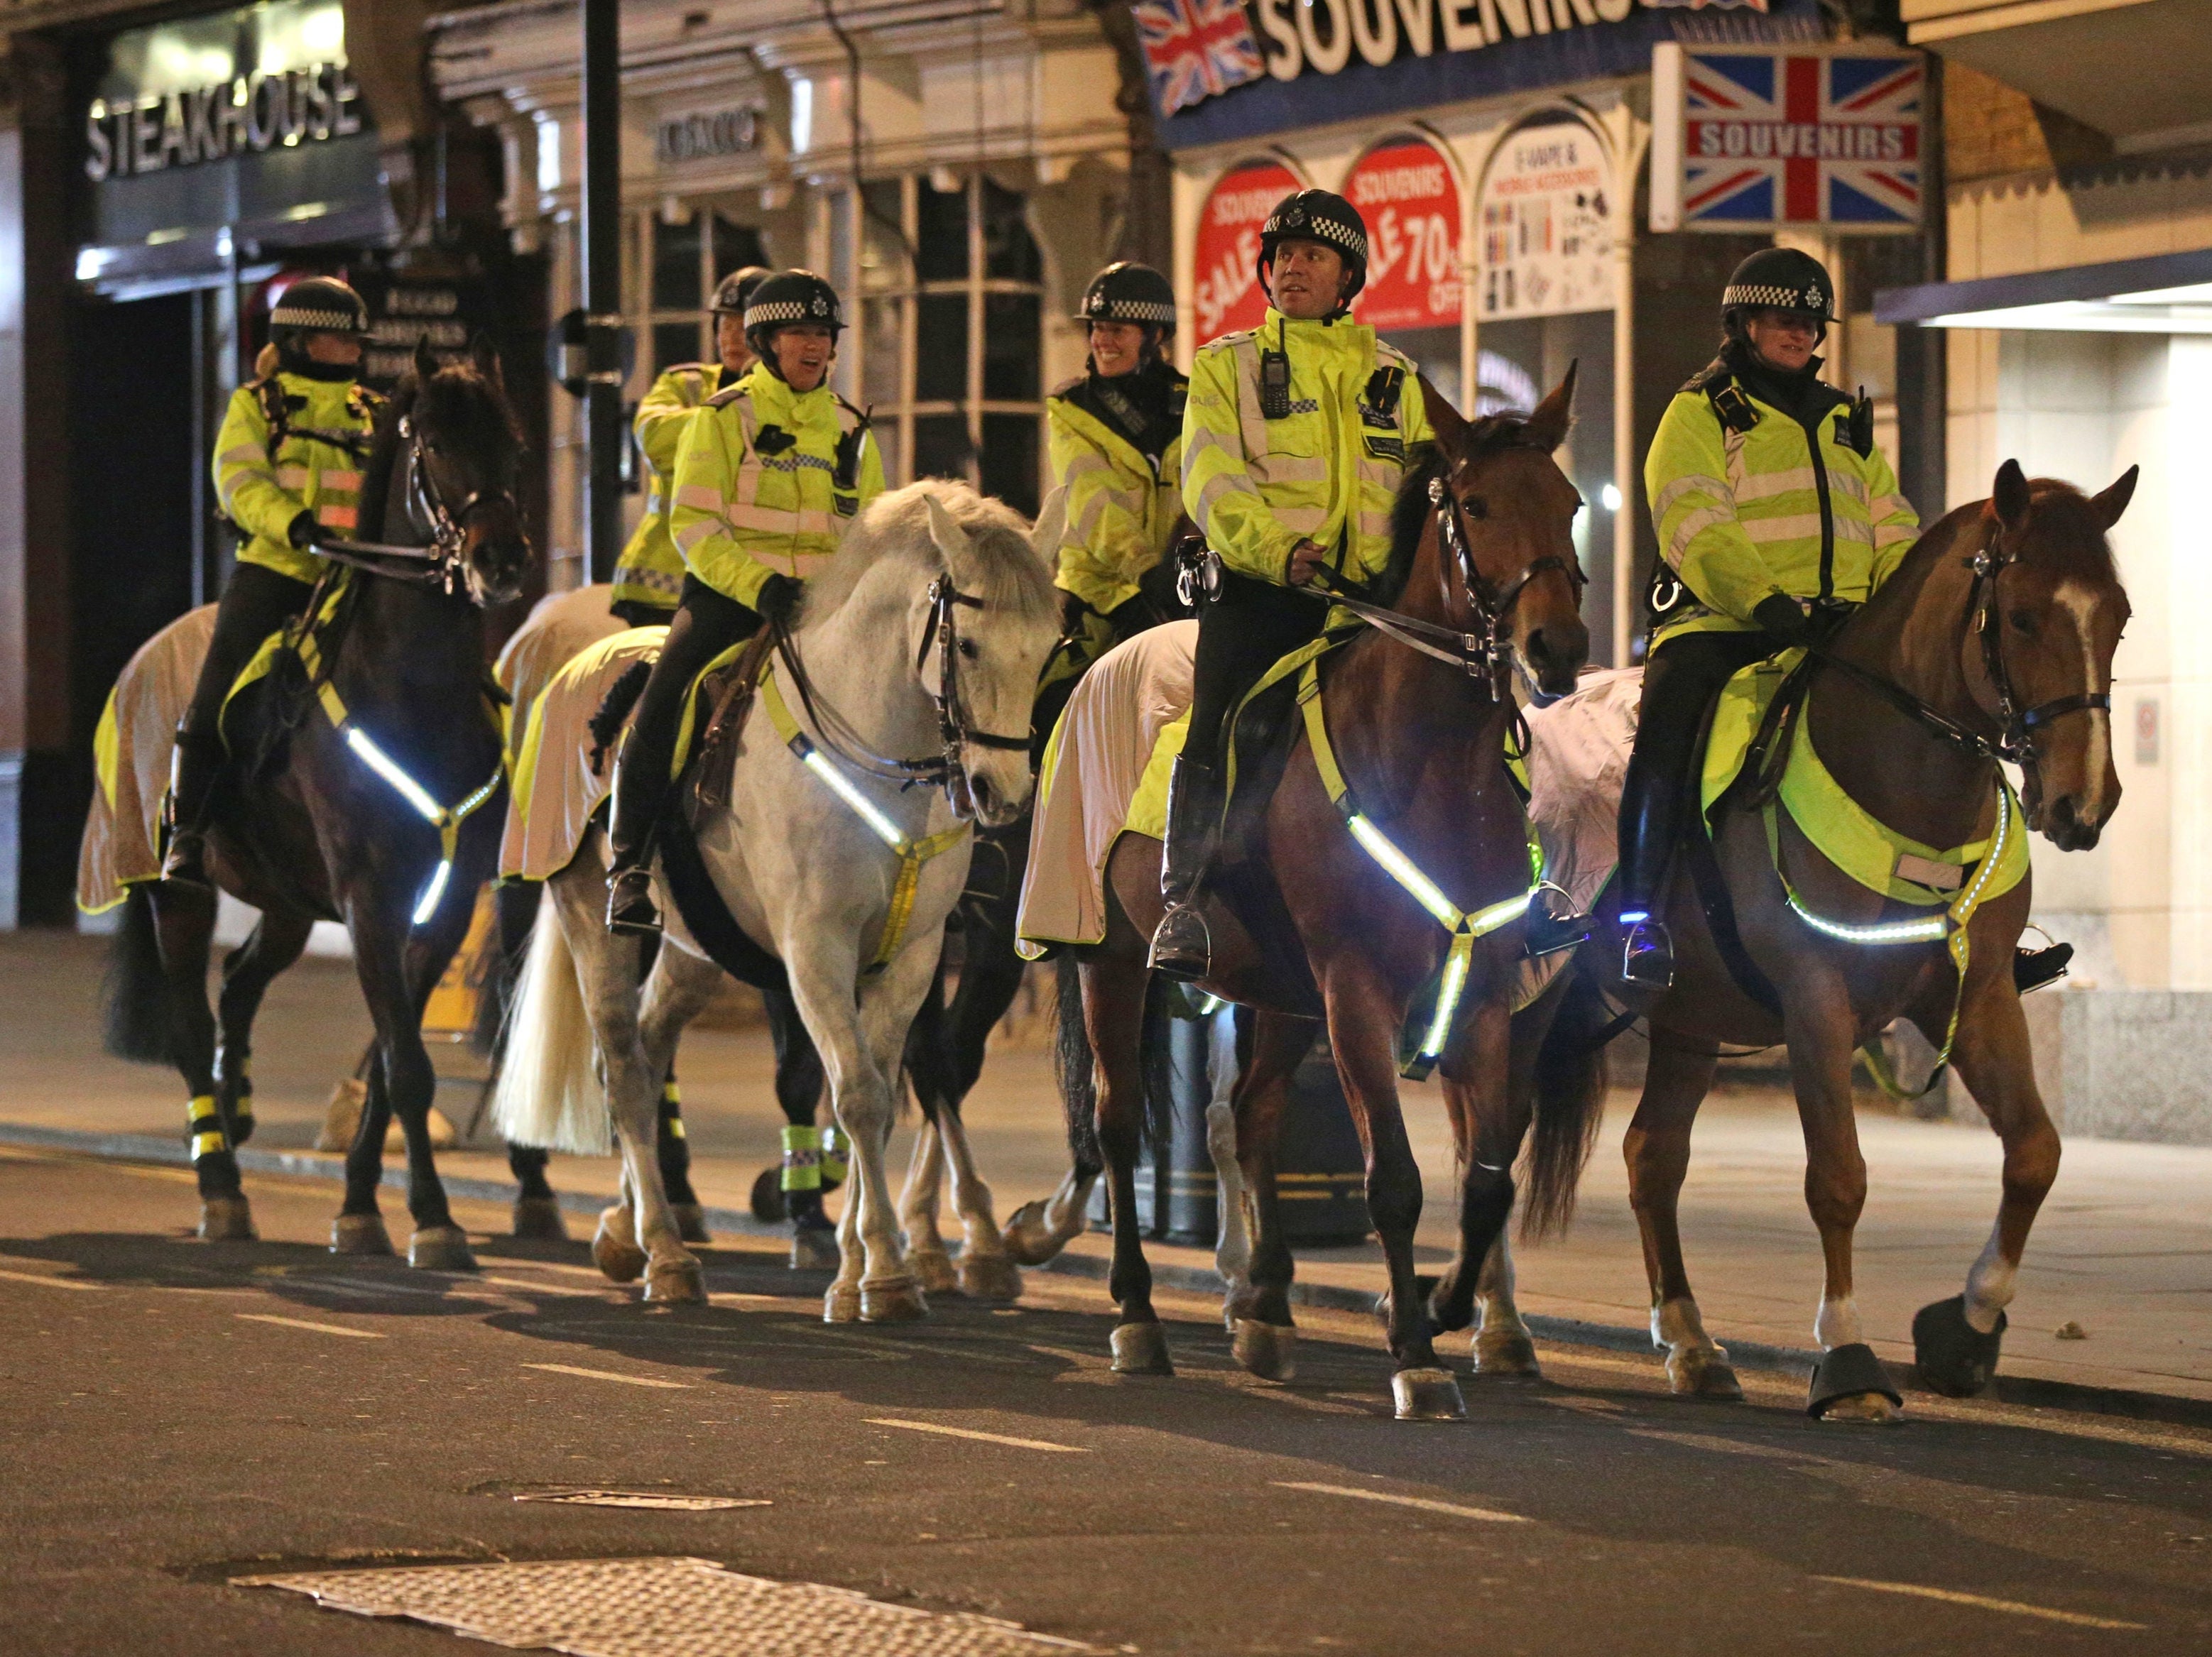 Mounted police patrol St James’s, London, on New Year’s Eve